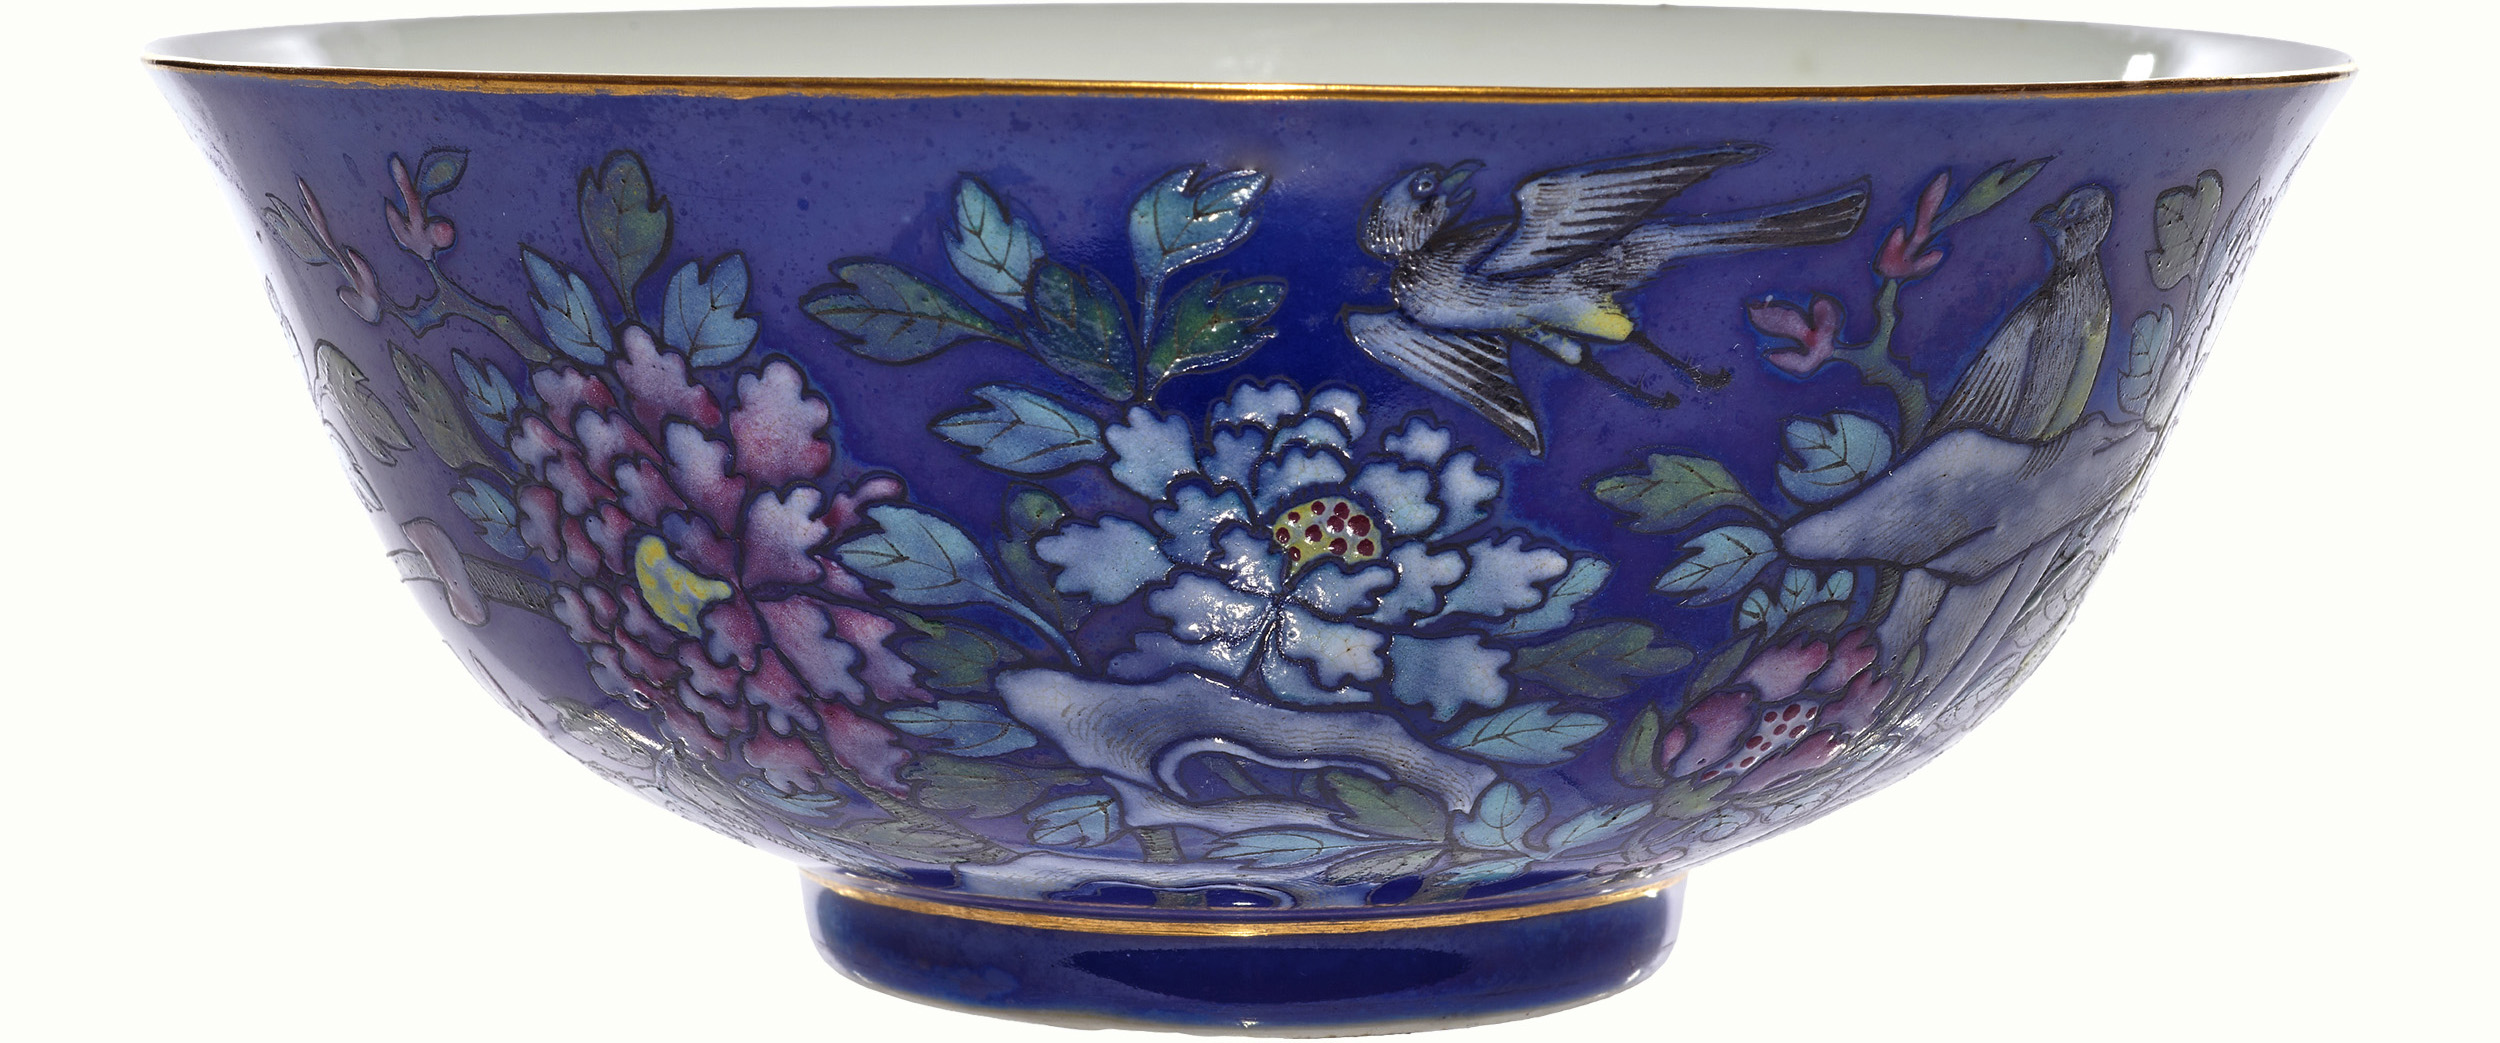 A Chinese famille rose blue ground bowl decorated with bird and floral motifs and one dragon inside the bowl, bearing Guangxu six-character mark, 6.625″ across.